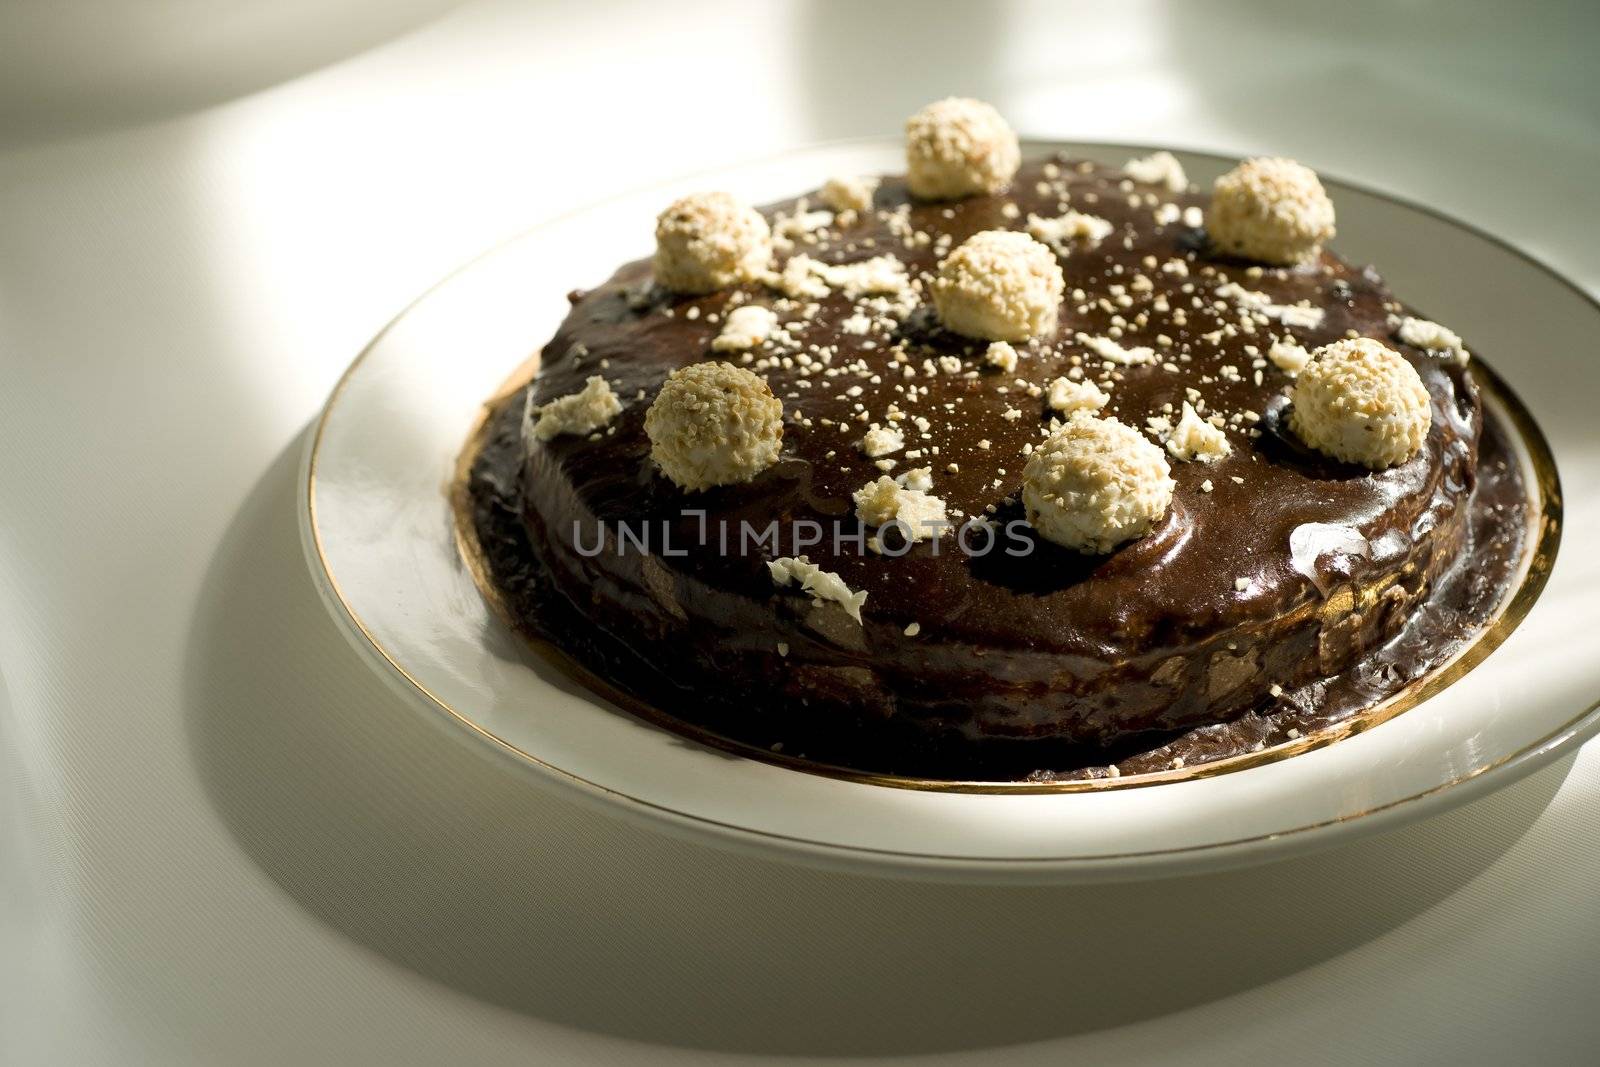 Chocolate cake with sweet decoration by mulden